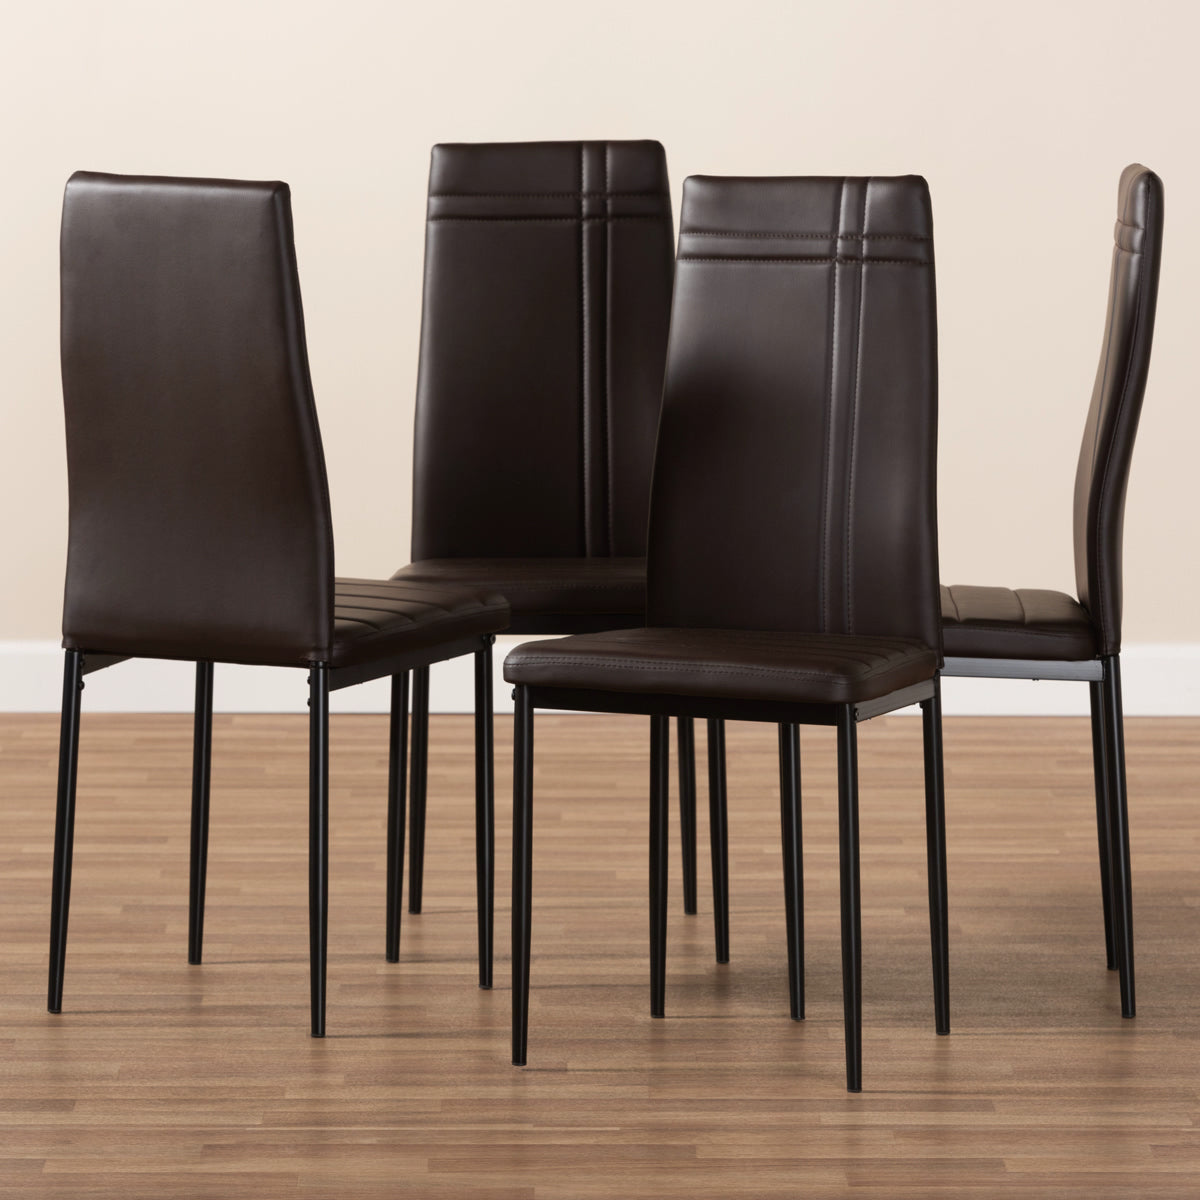 Baxton Studio Matiese Modern and Contemporary Brown Faux Leather Upholstered Dining Chair (Set of 4) Baxton Studio-dining chair-Minimal And Modern - 5